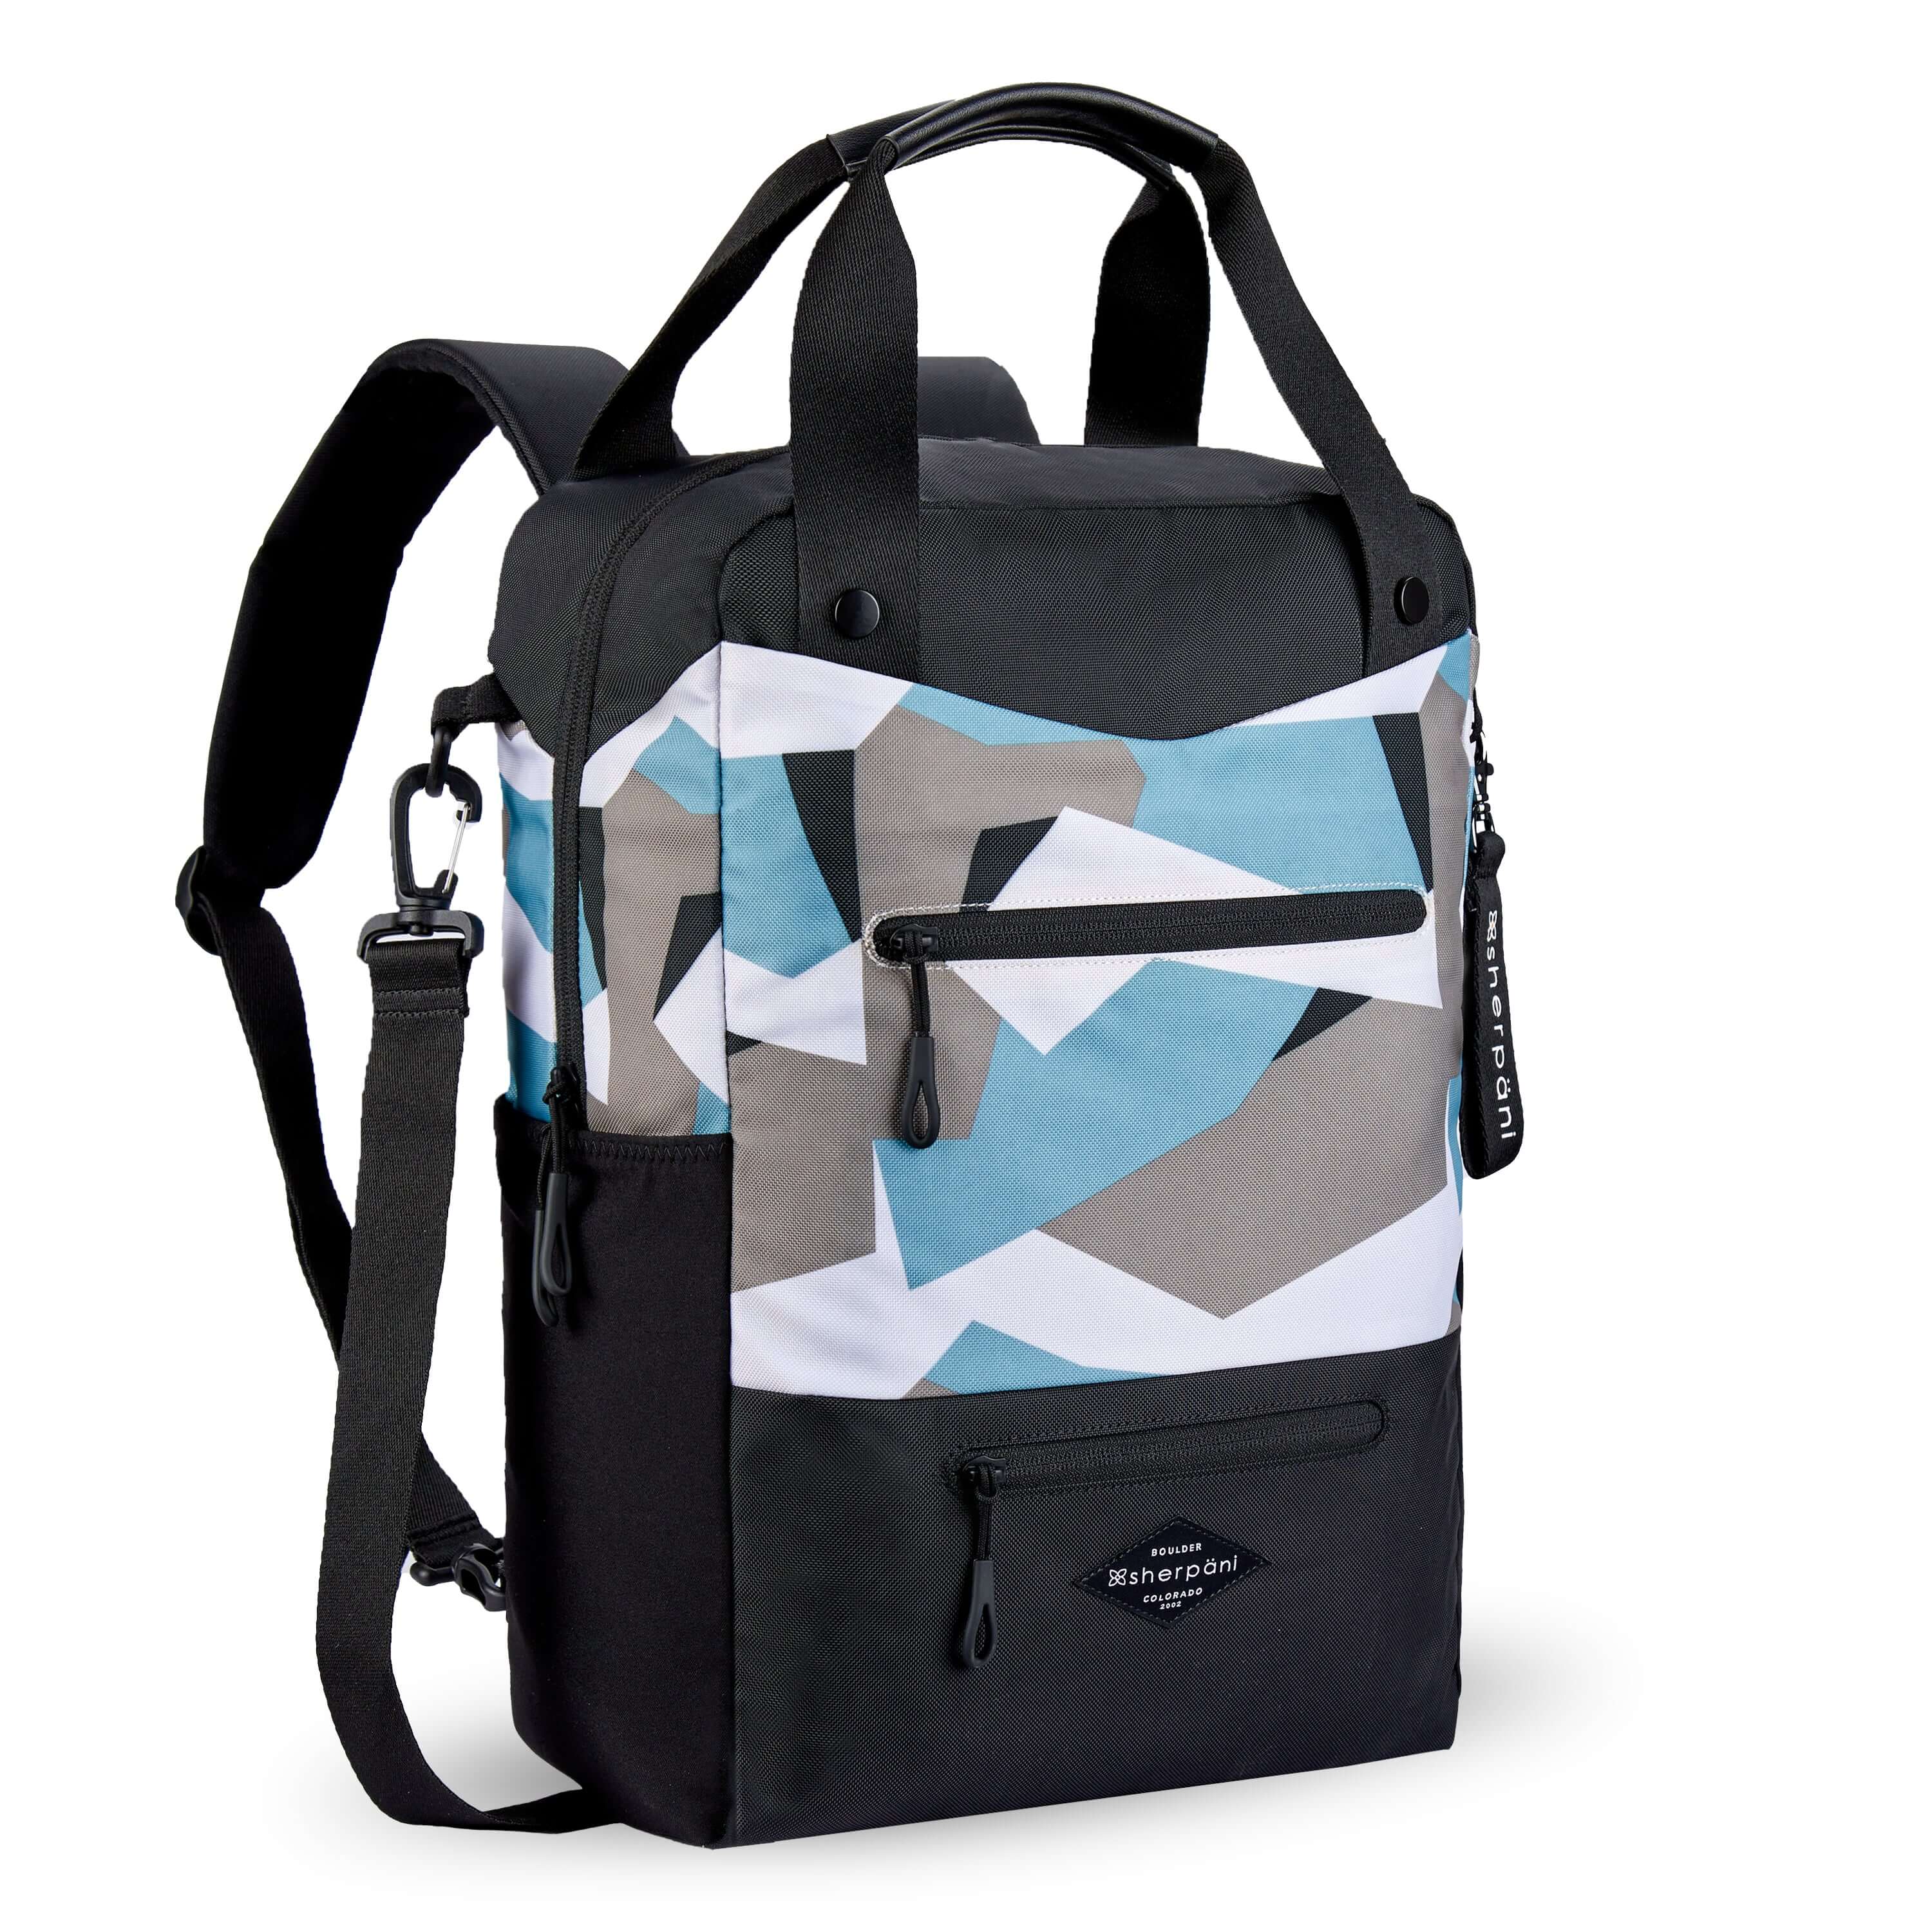 Angled front view of Sherpani's three in one bag, the Camden in Summer Camo. The bag is two toned in black and in a camouflage pattern of blue, grey and white. There are two external zipper pockets on the front panel with easy pull zippers in black. A branded Sherpani keychain is clipped to the upper right corner. An water bottle holder sits on either side of the bag. The bag has an adjustable crossbody strap, padded/adjustable backpack straps and short tote handles fixed at the top. #color_summer camo